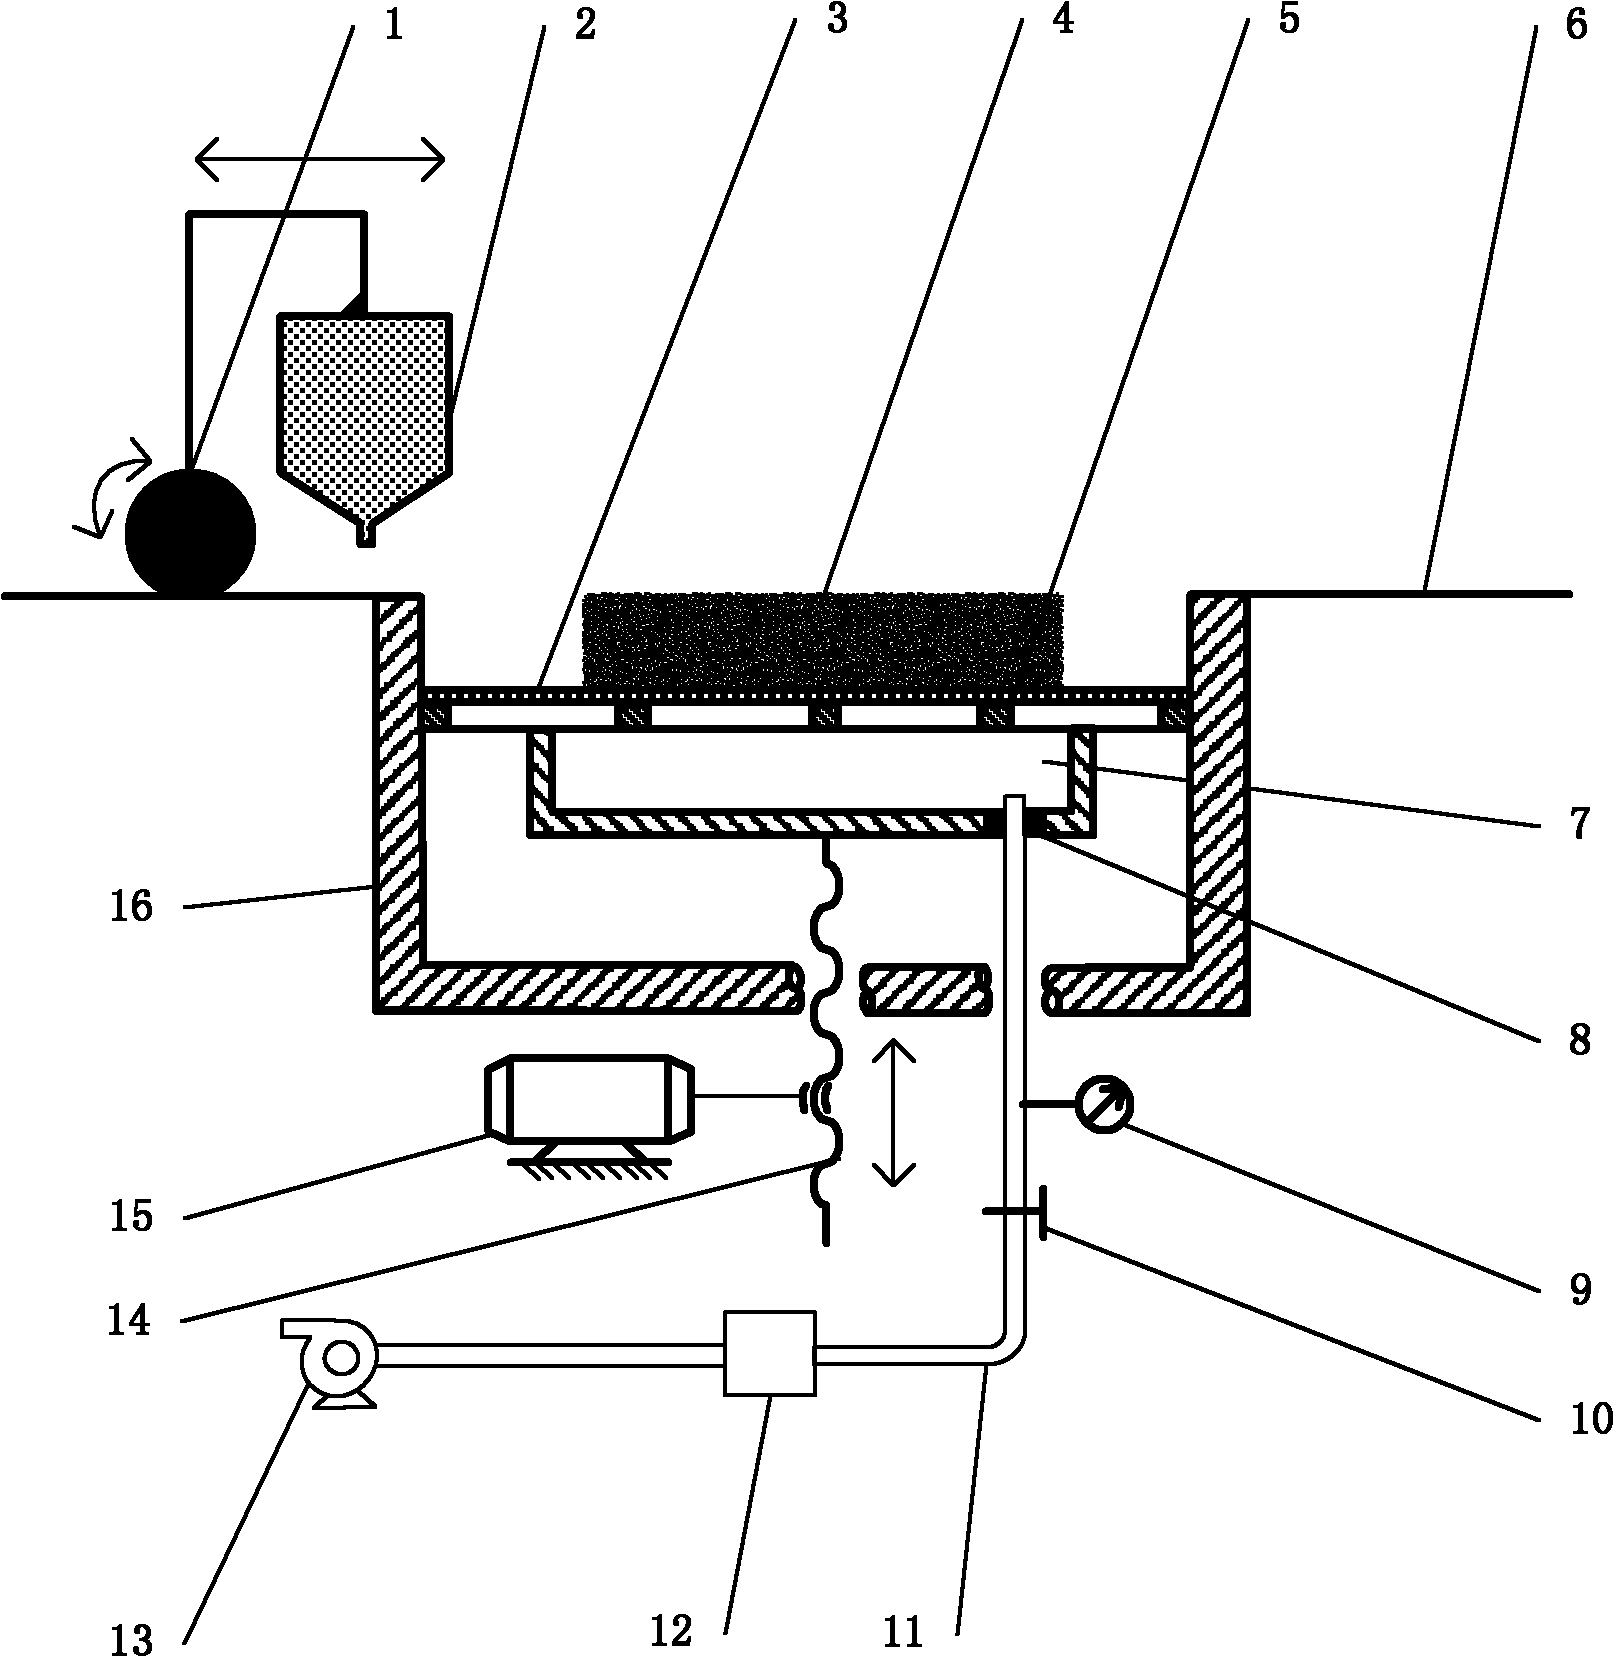 Negative pressure-based device and method for manufacturing porous textures by laser sintering and quick molding